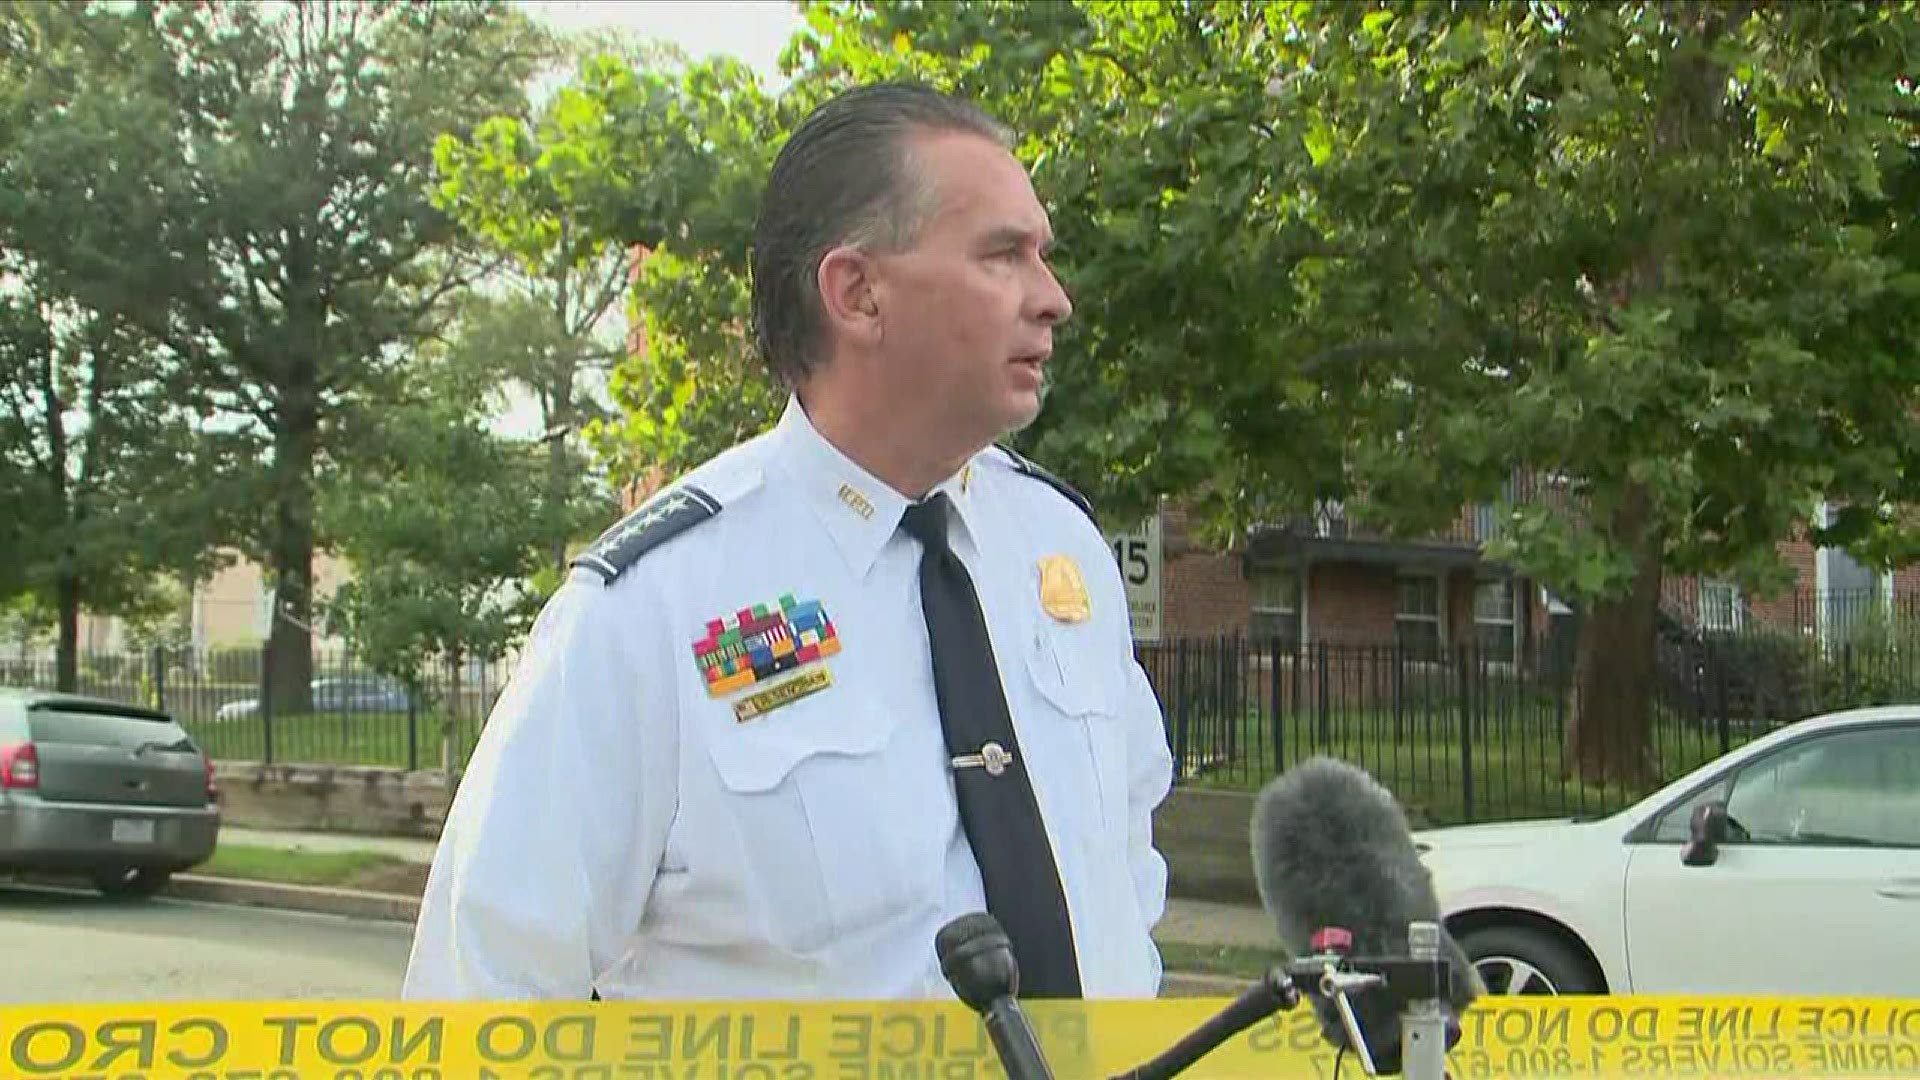 Metropolitan Police Department confirms a five-year-old was shot in the 1300 block of Congress St. in southeast D.C.